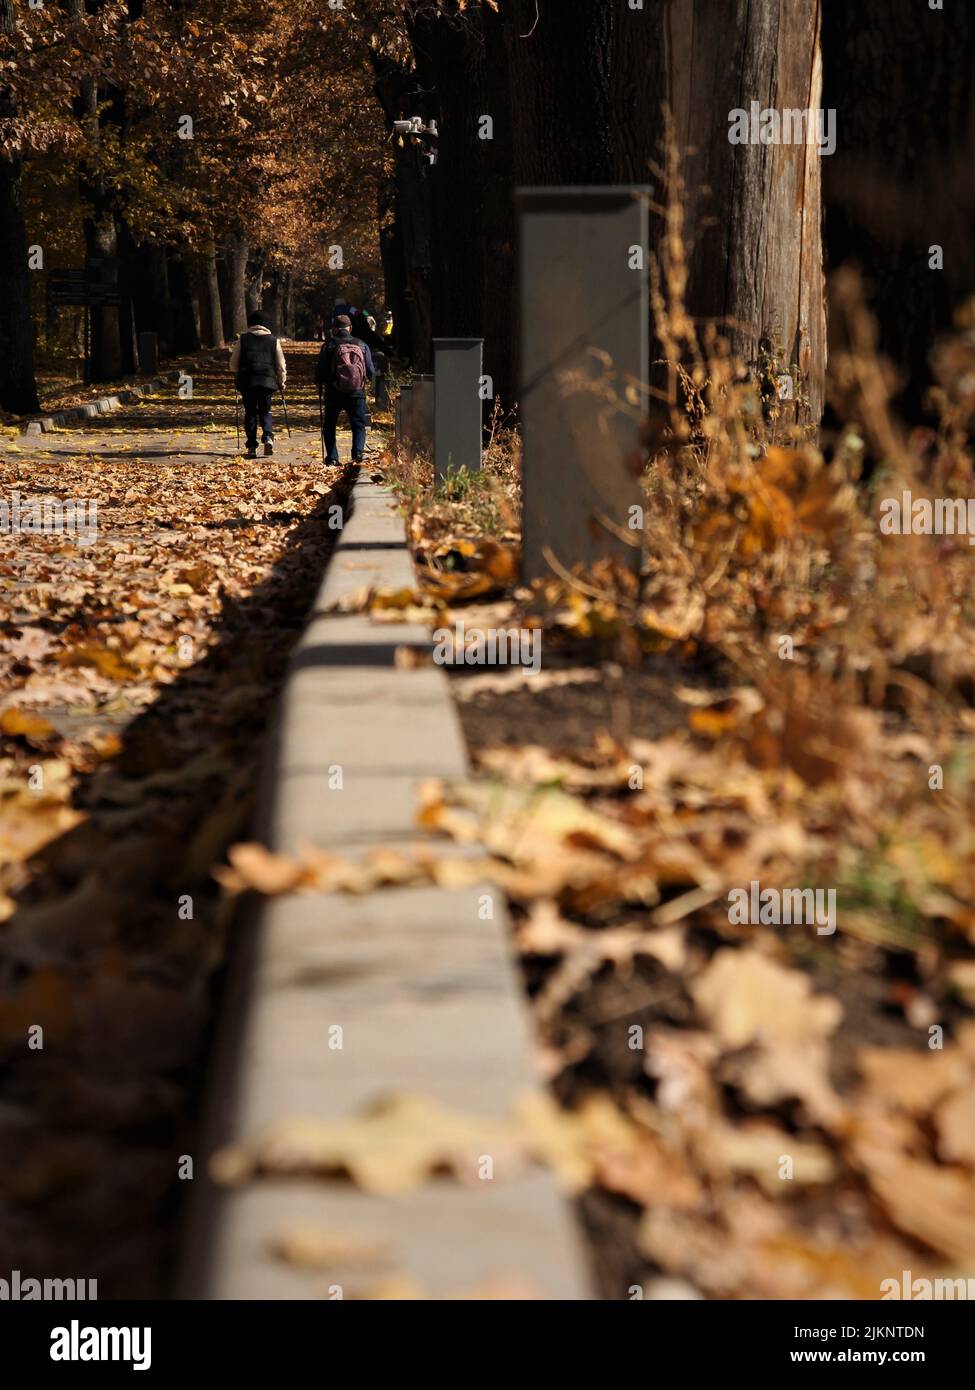 A closeup shot of a curb sidewalk in a park surrounded by dead leaves Stock Photo